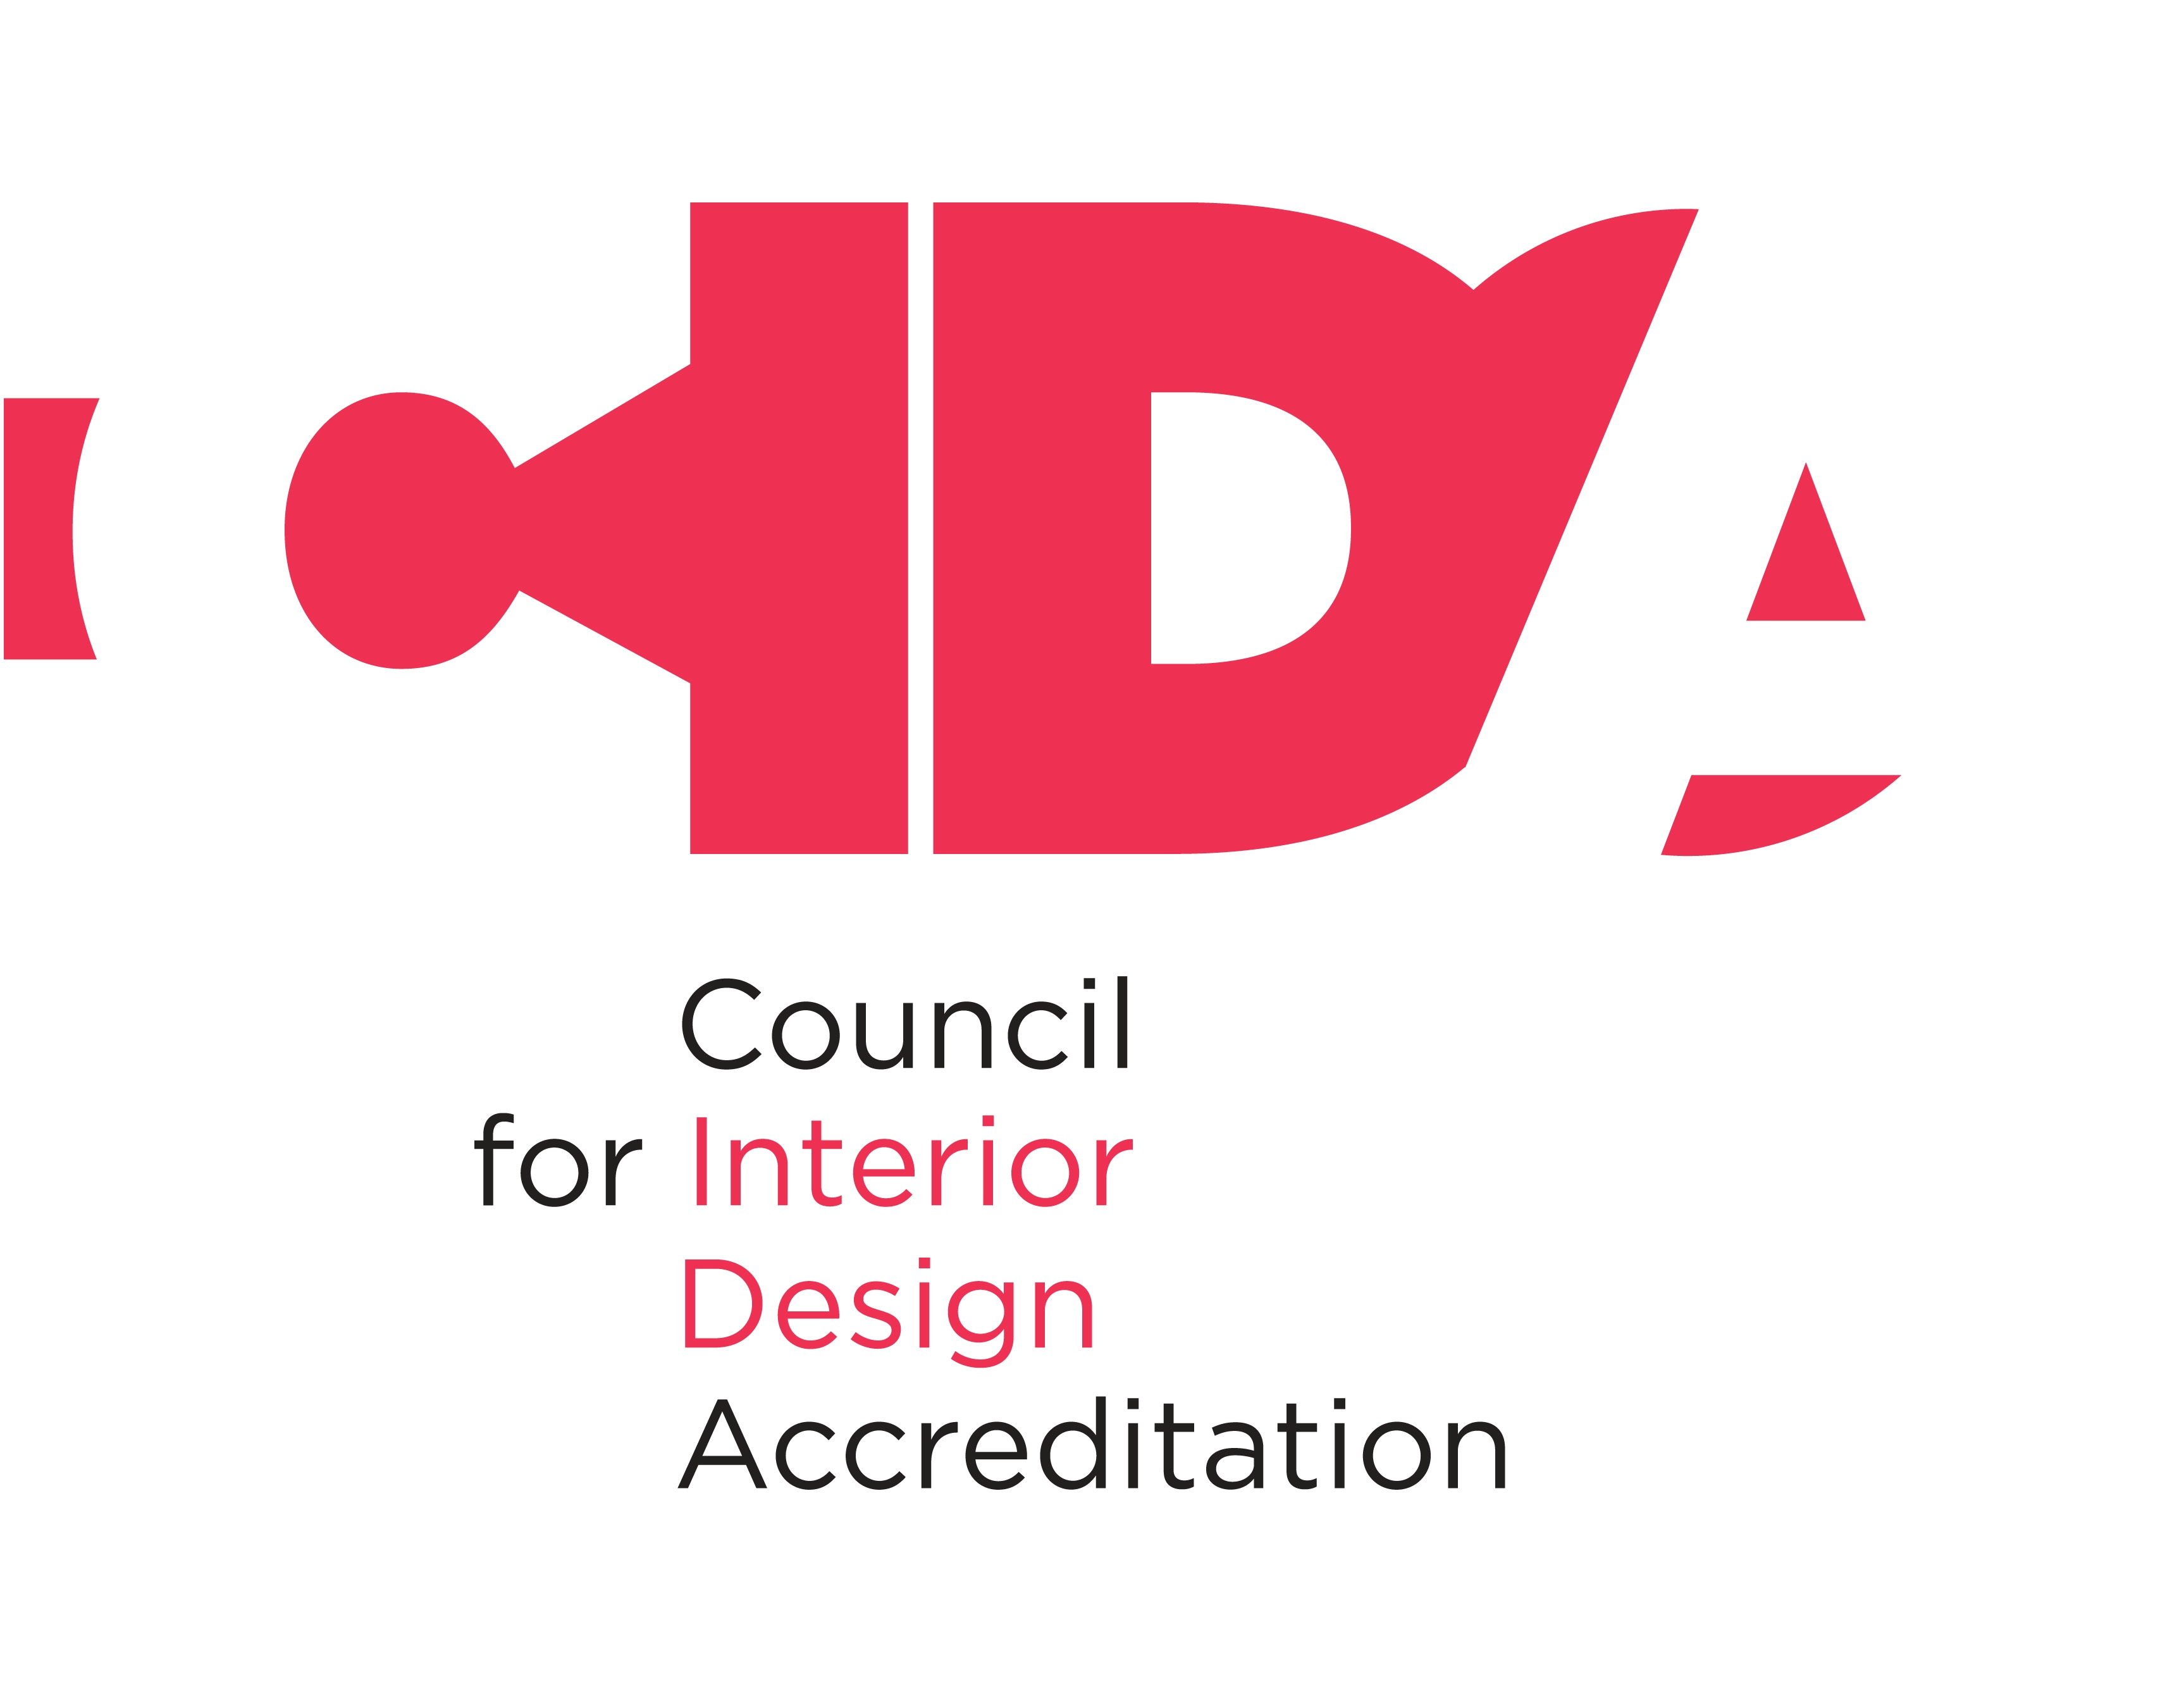 This is the logo for the Council for Interior Design Accreditation.